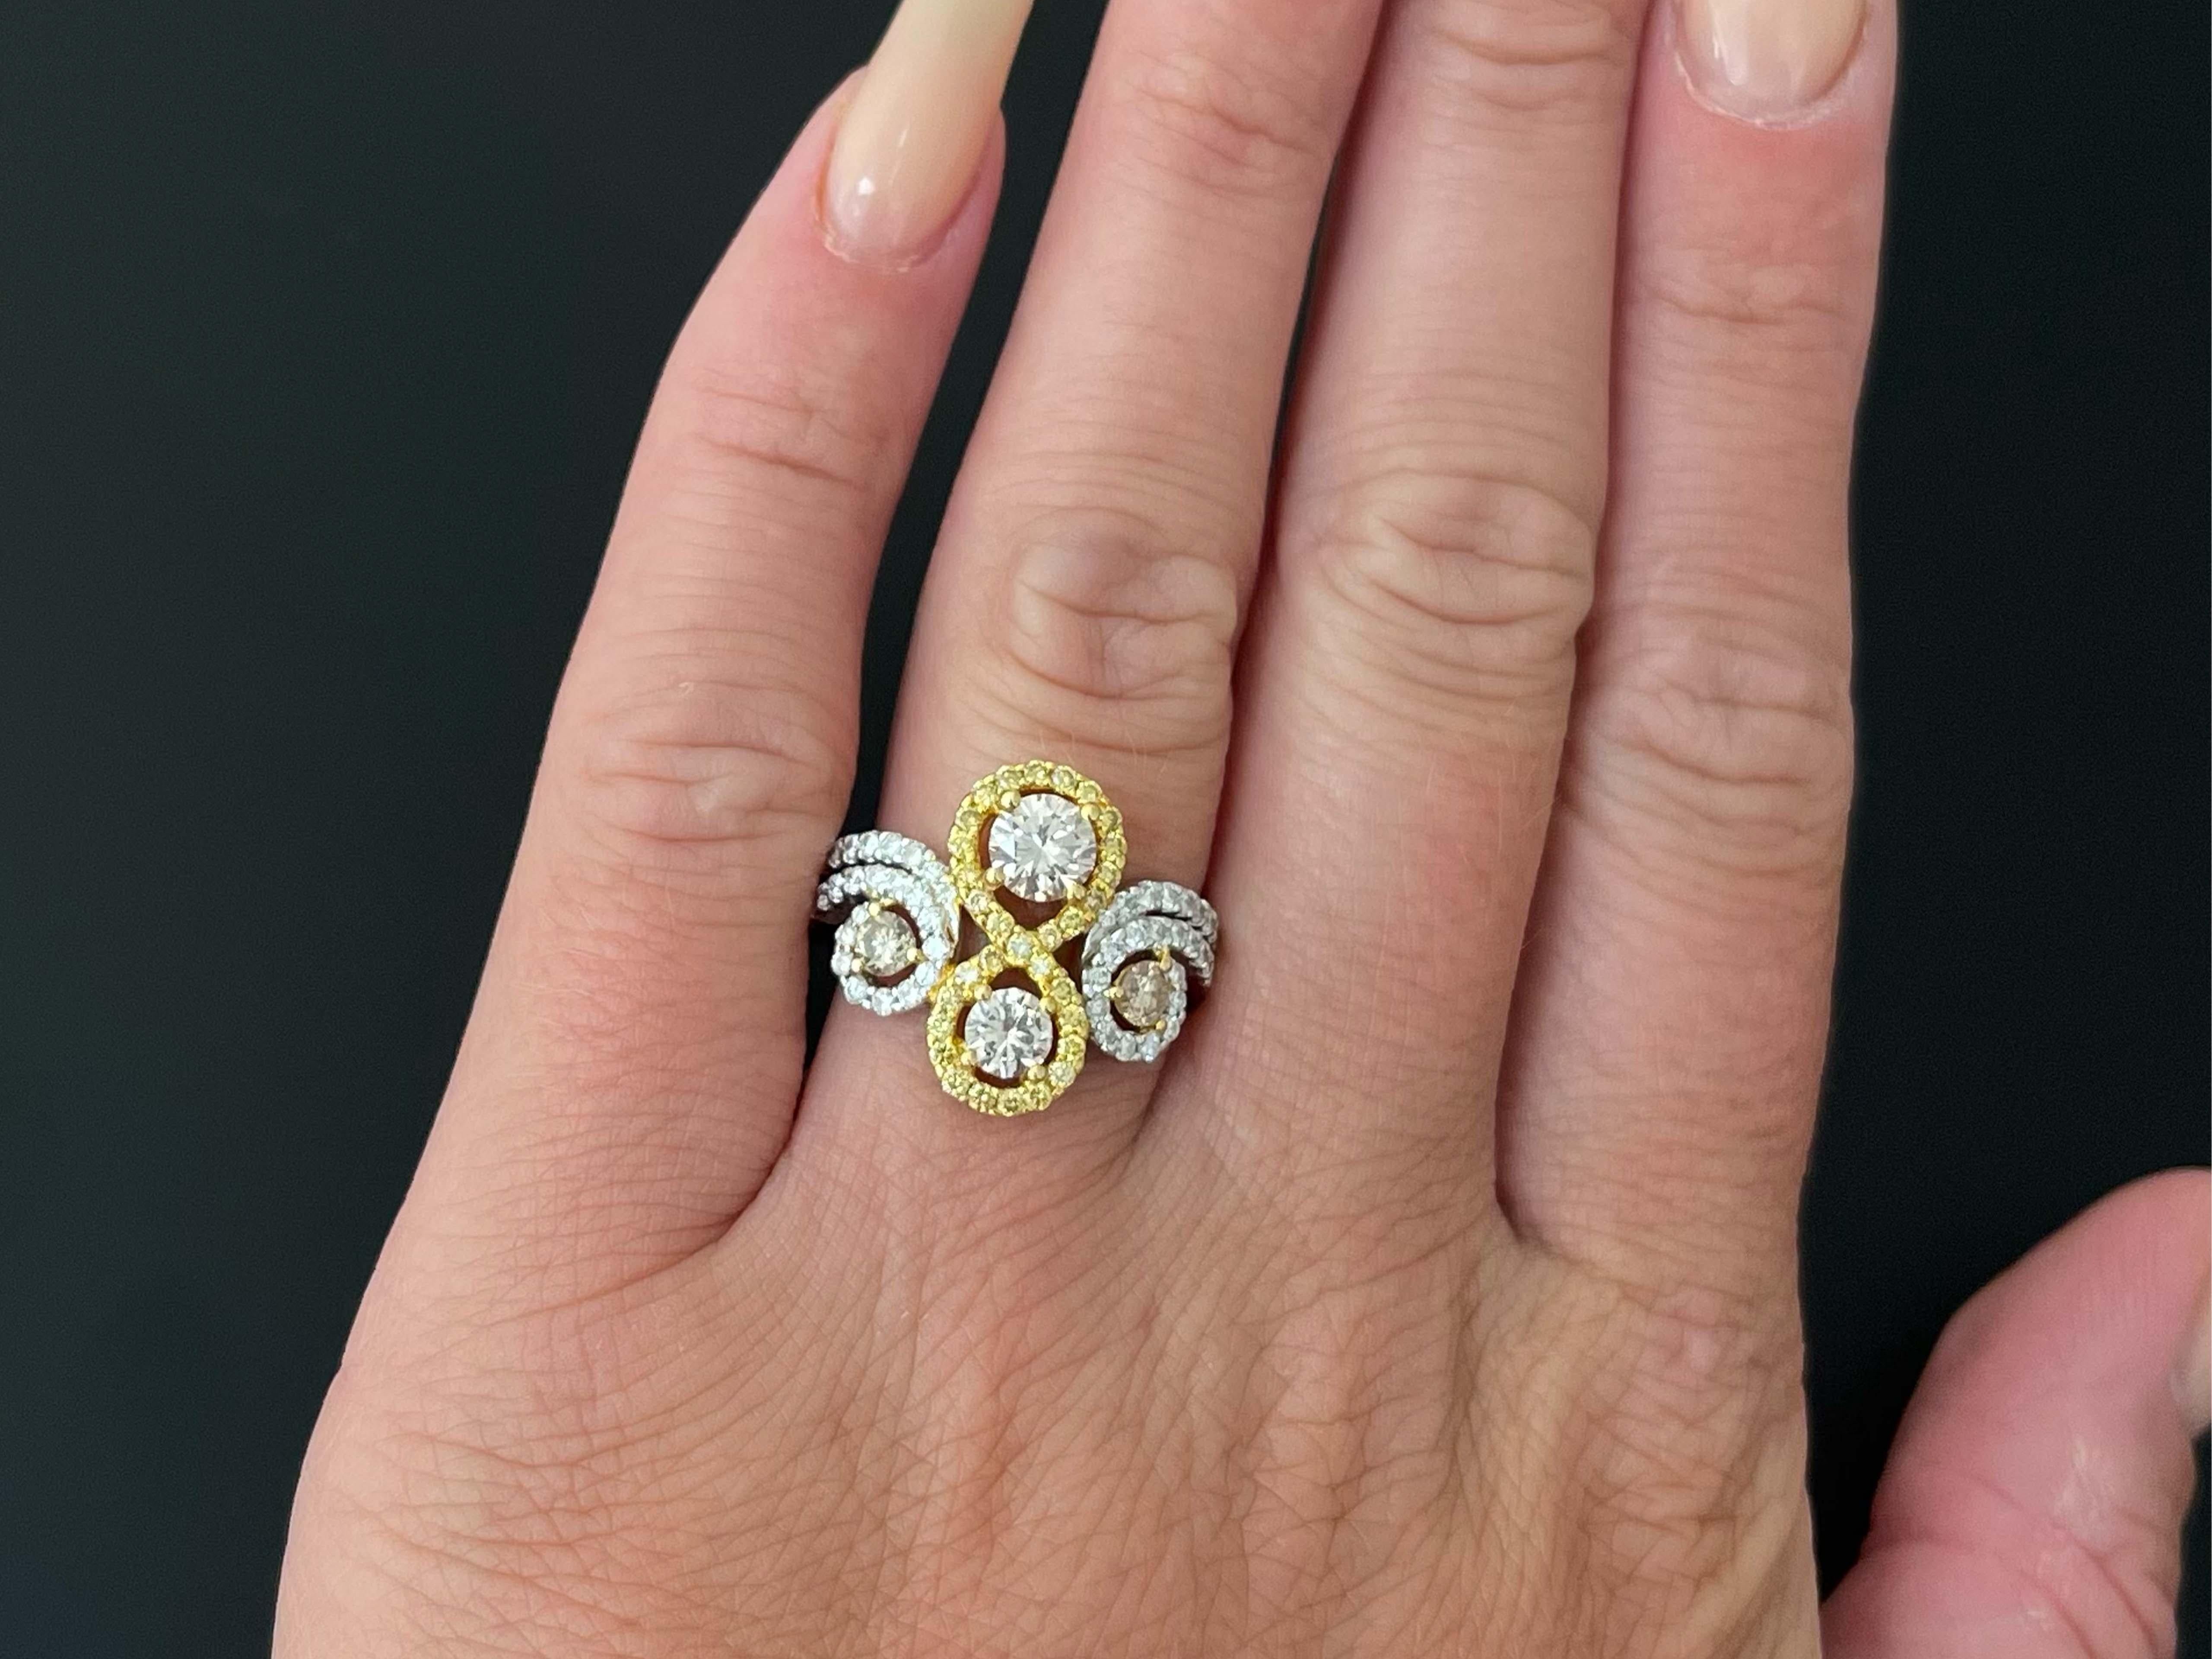 4 Stone Infinity Diamond Ring, Champagne, Yellow and White Diamonds in 18k White Gold. This stunning ring features 4 sparkly champagne diamonds prong set and VS in clarity. Two of these diamonds are surrounded by fancy intense yellow diamonds in an